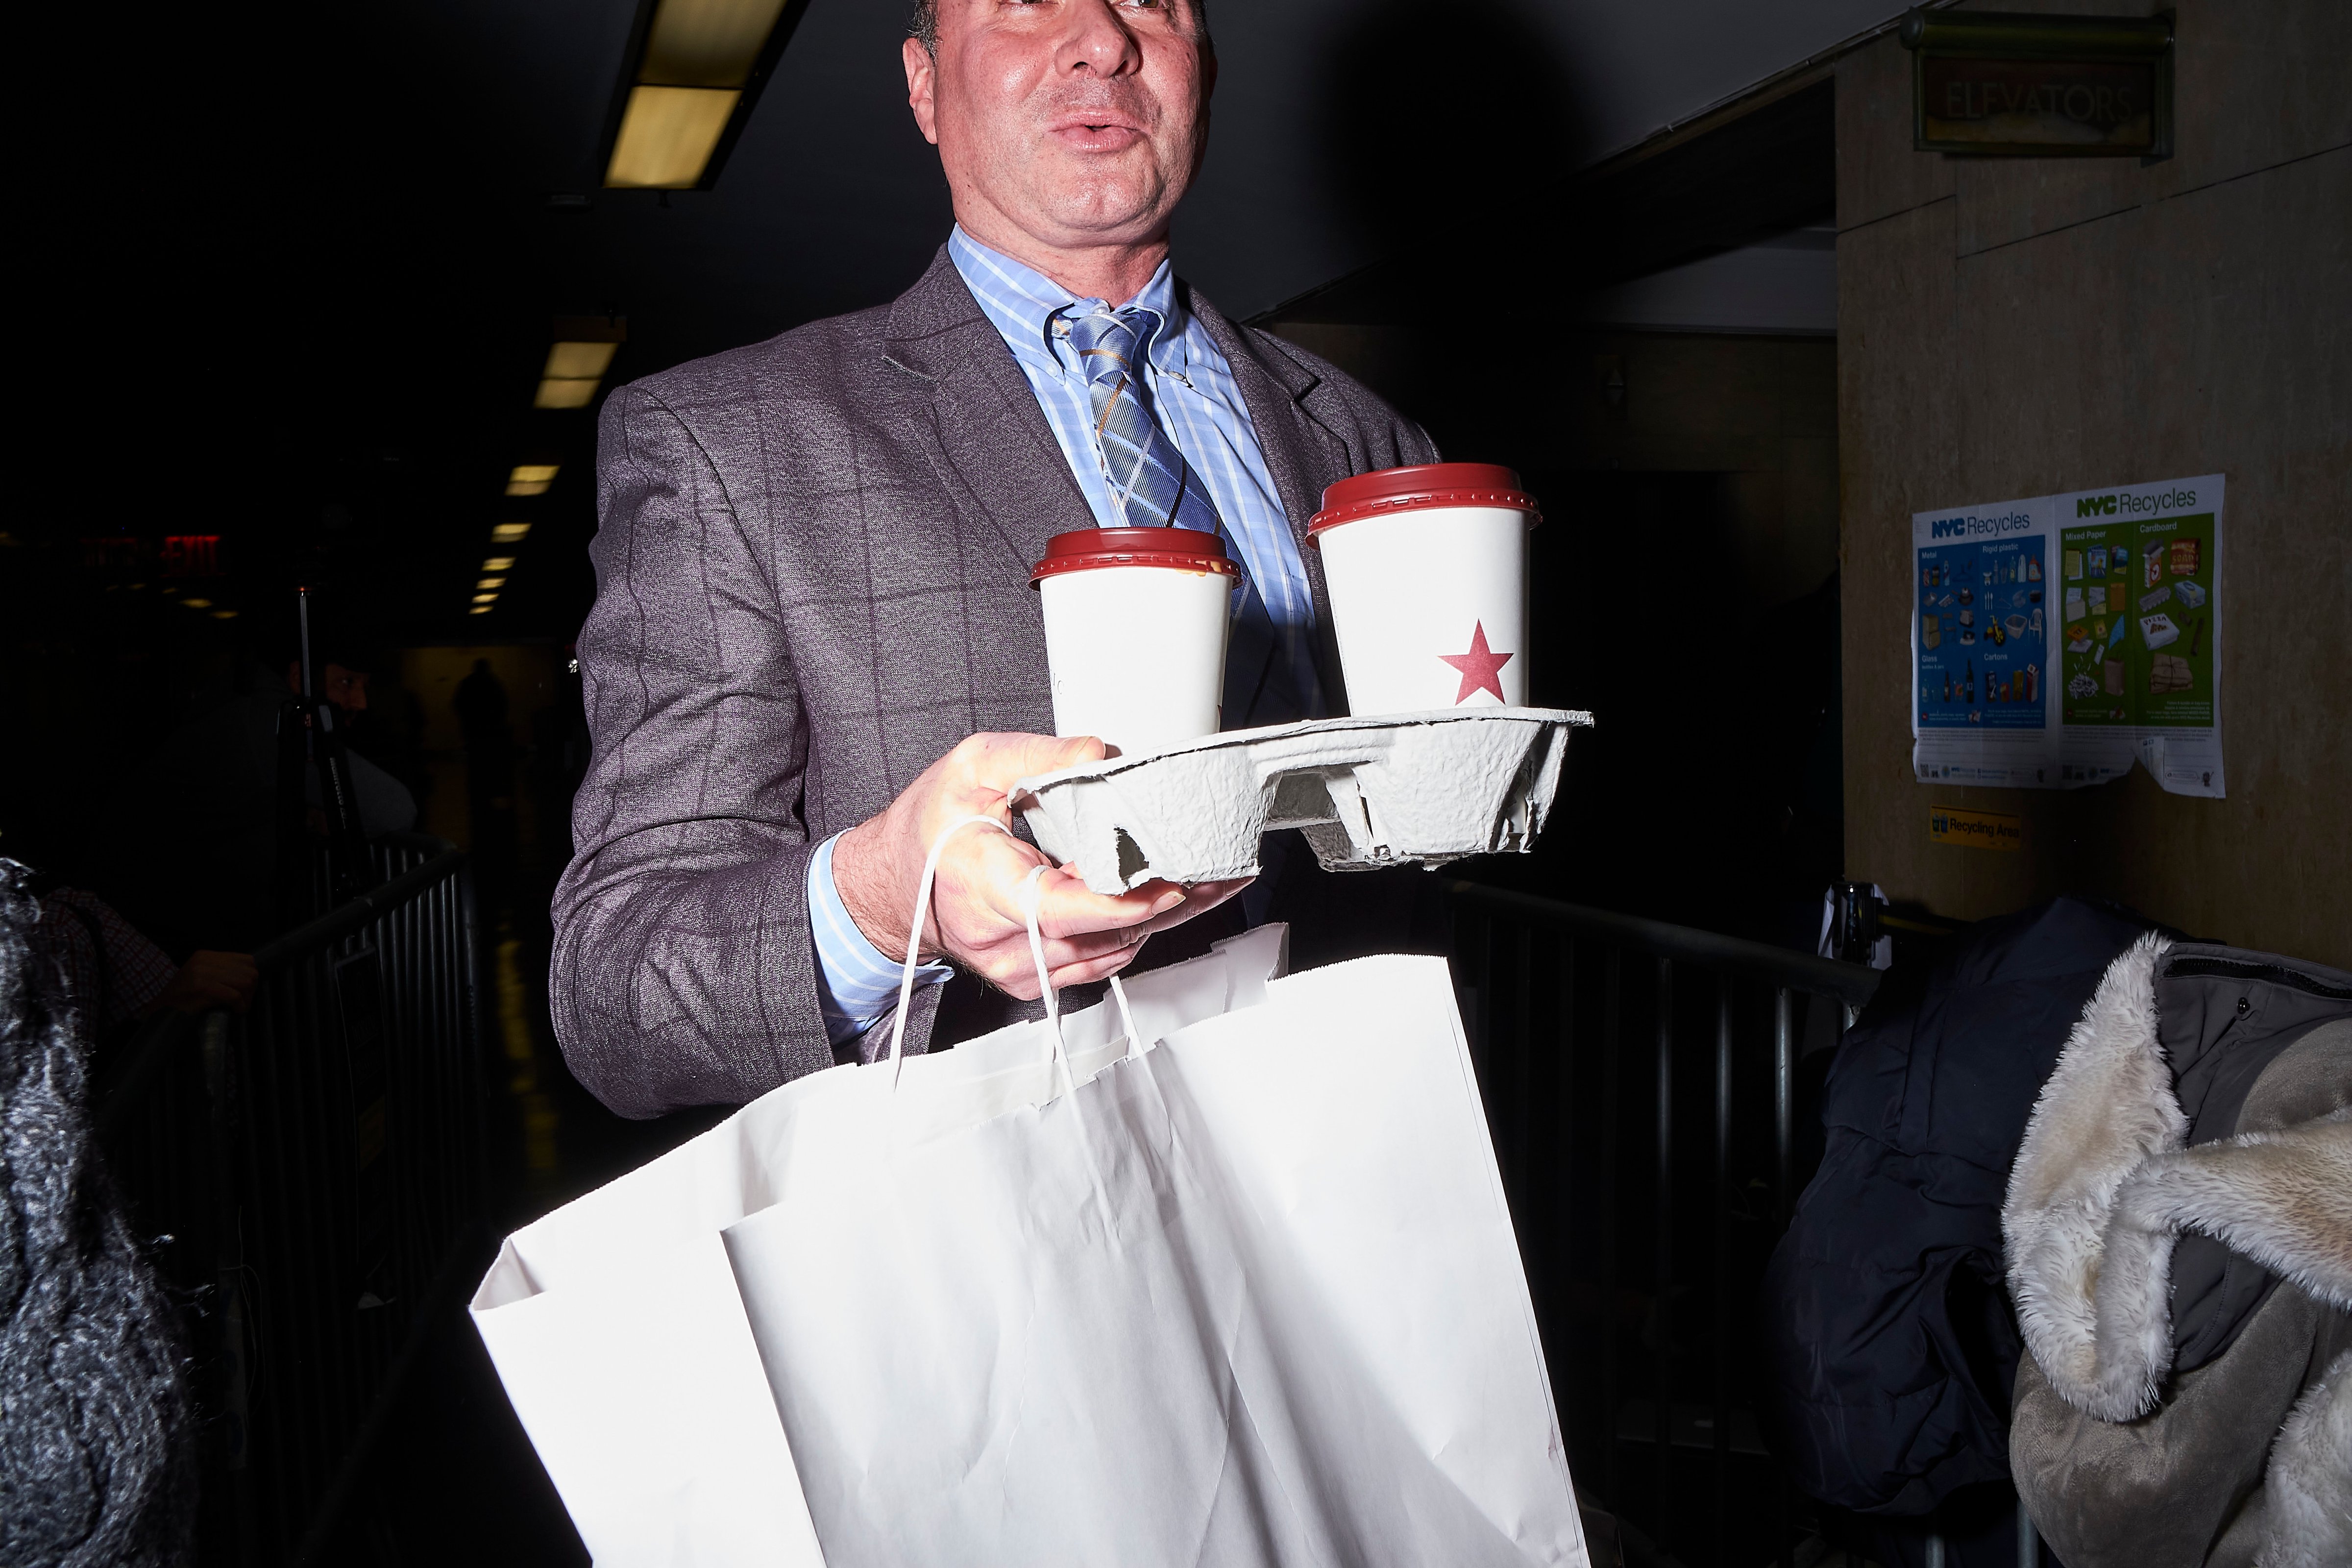 A member of Weinstein's legal team delivers lunch to his client in the courtroom on Jan. 22 (John Taggart)